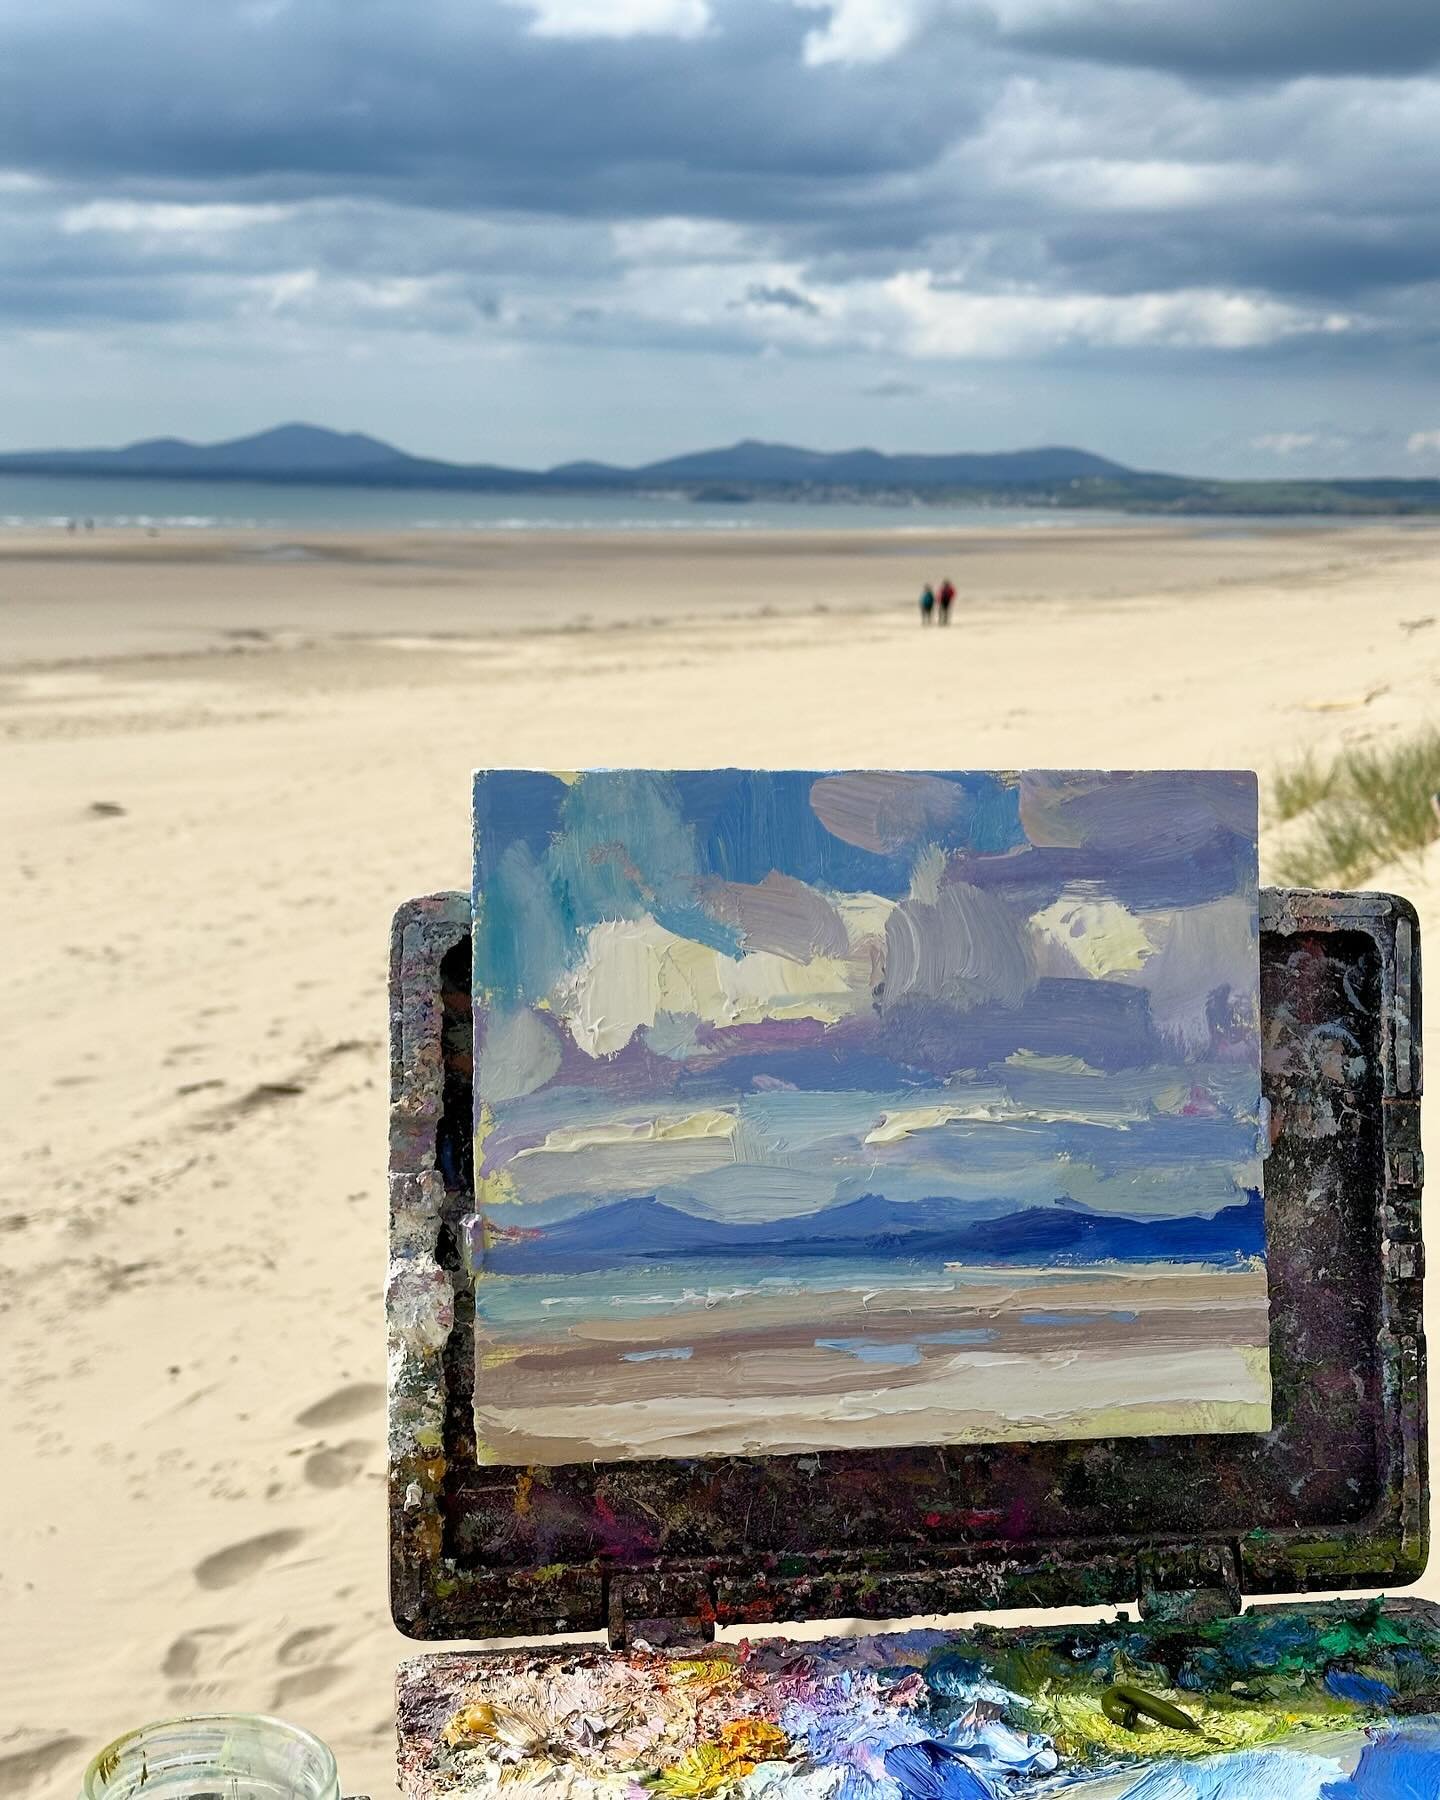 Yesterday&rsquo;s beach paint on Harlech beach - THE most perfect painting conditions. And then my painting fell in the sand 🙄

Happy painting days with @georginapotterartist @sarahmanolescueartist 🌊 

#harlech #paintingwales #paintingfromlife #ple